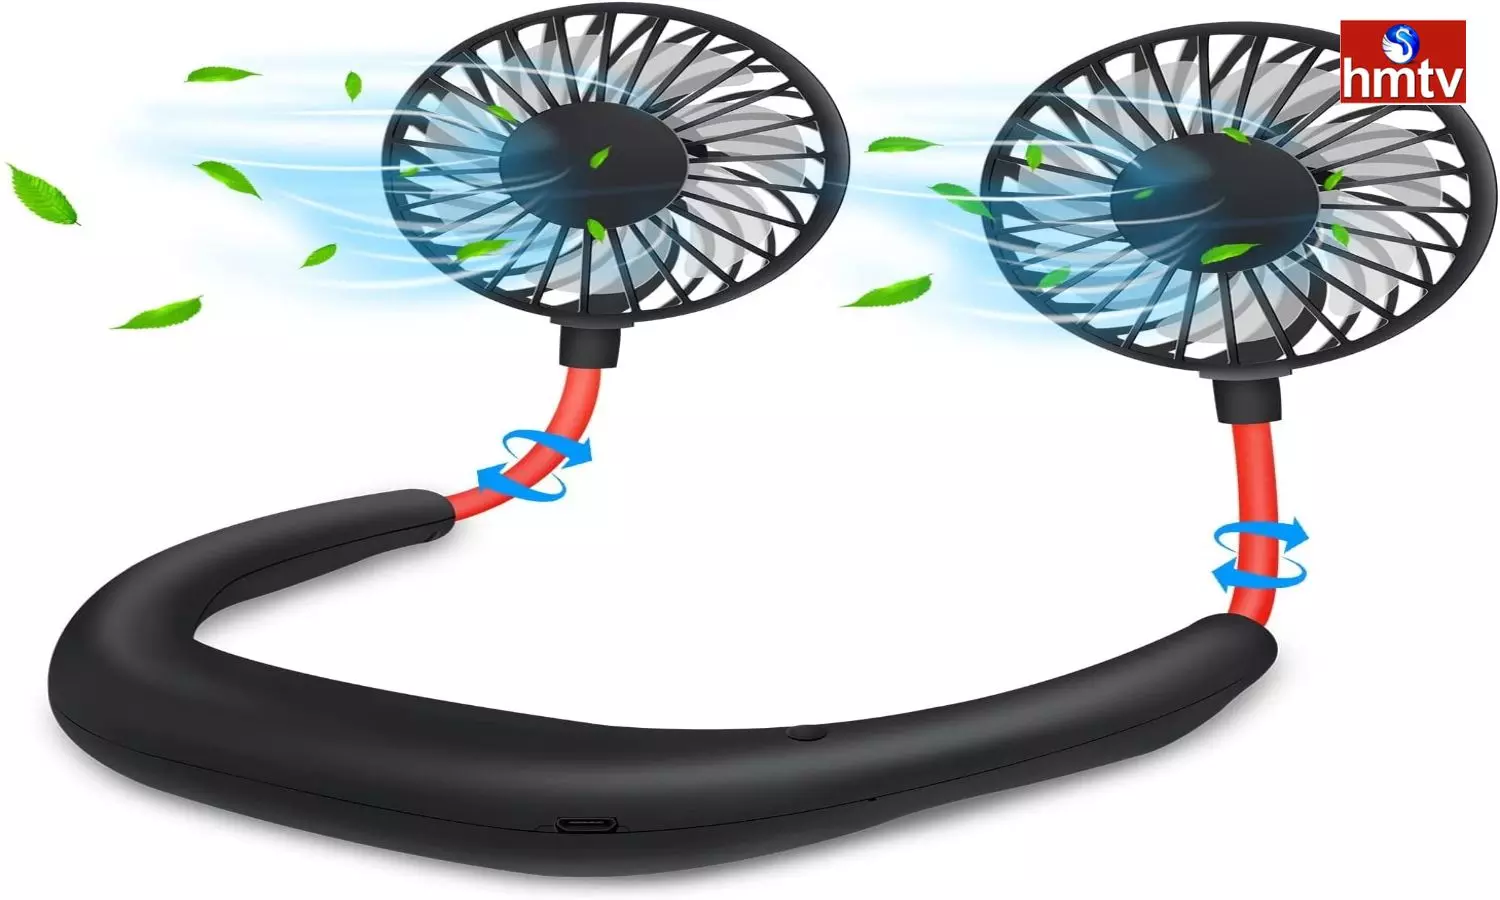 Rechargeable mini USB personal VERVENIX Hand Free Neck Fan available in Amazon deal of the Day